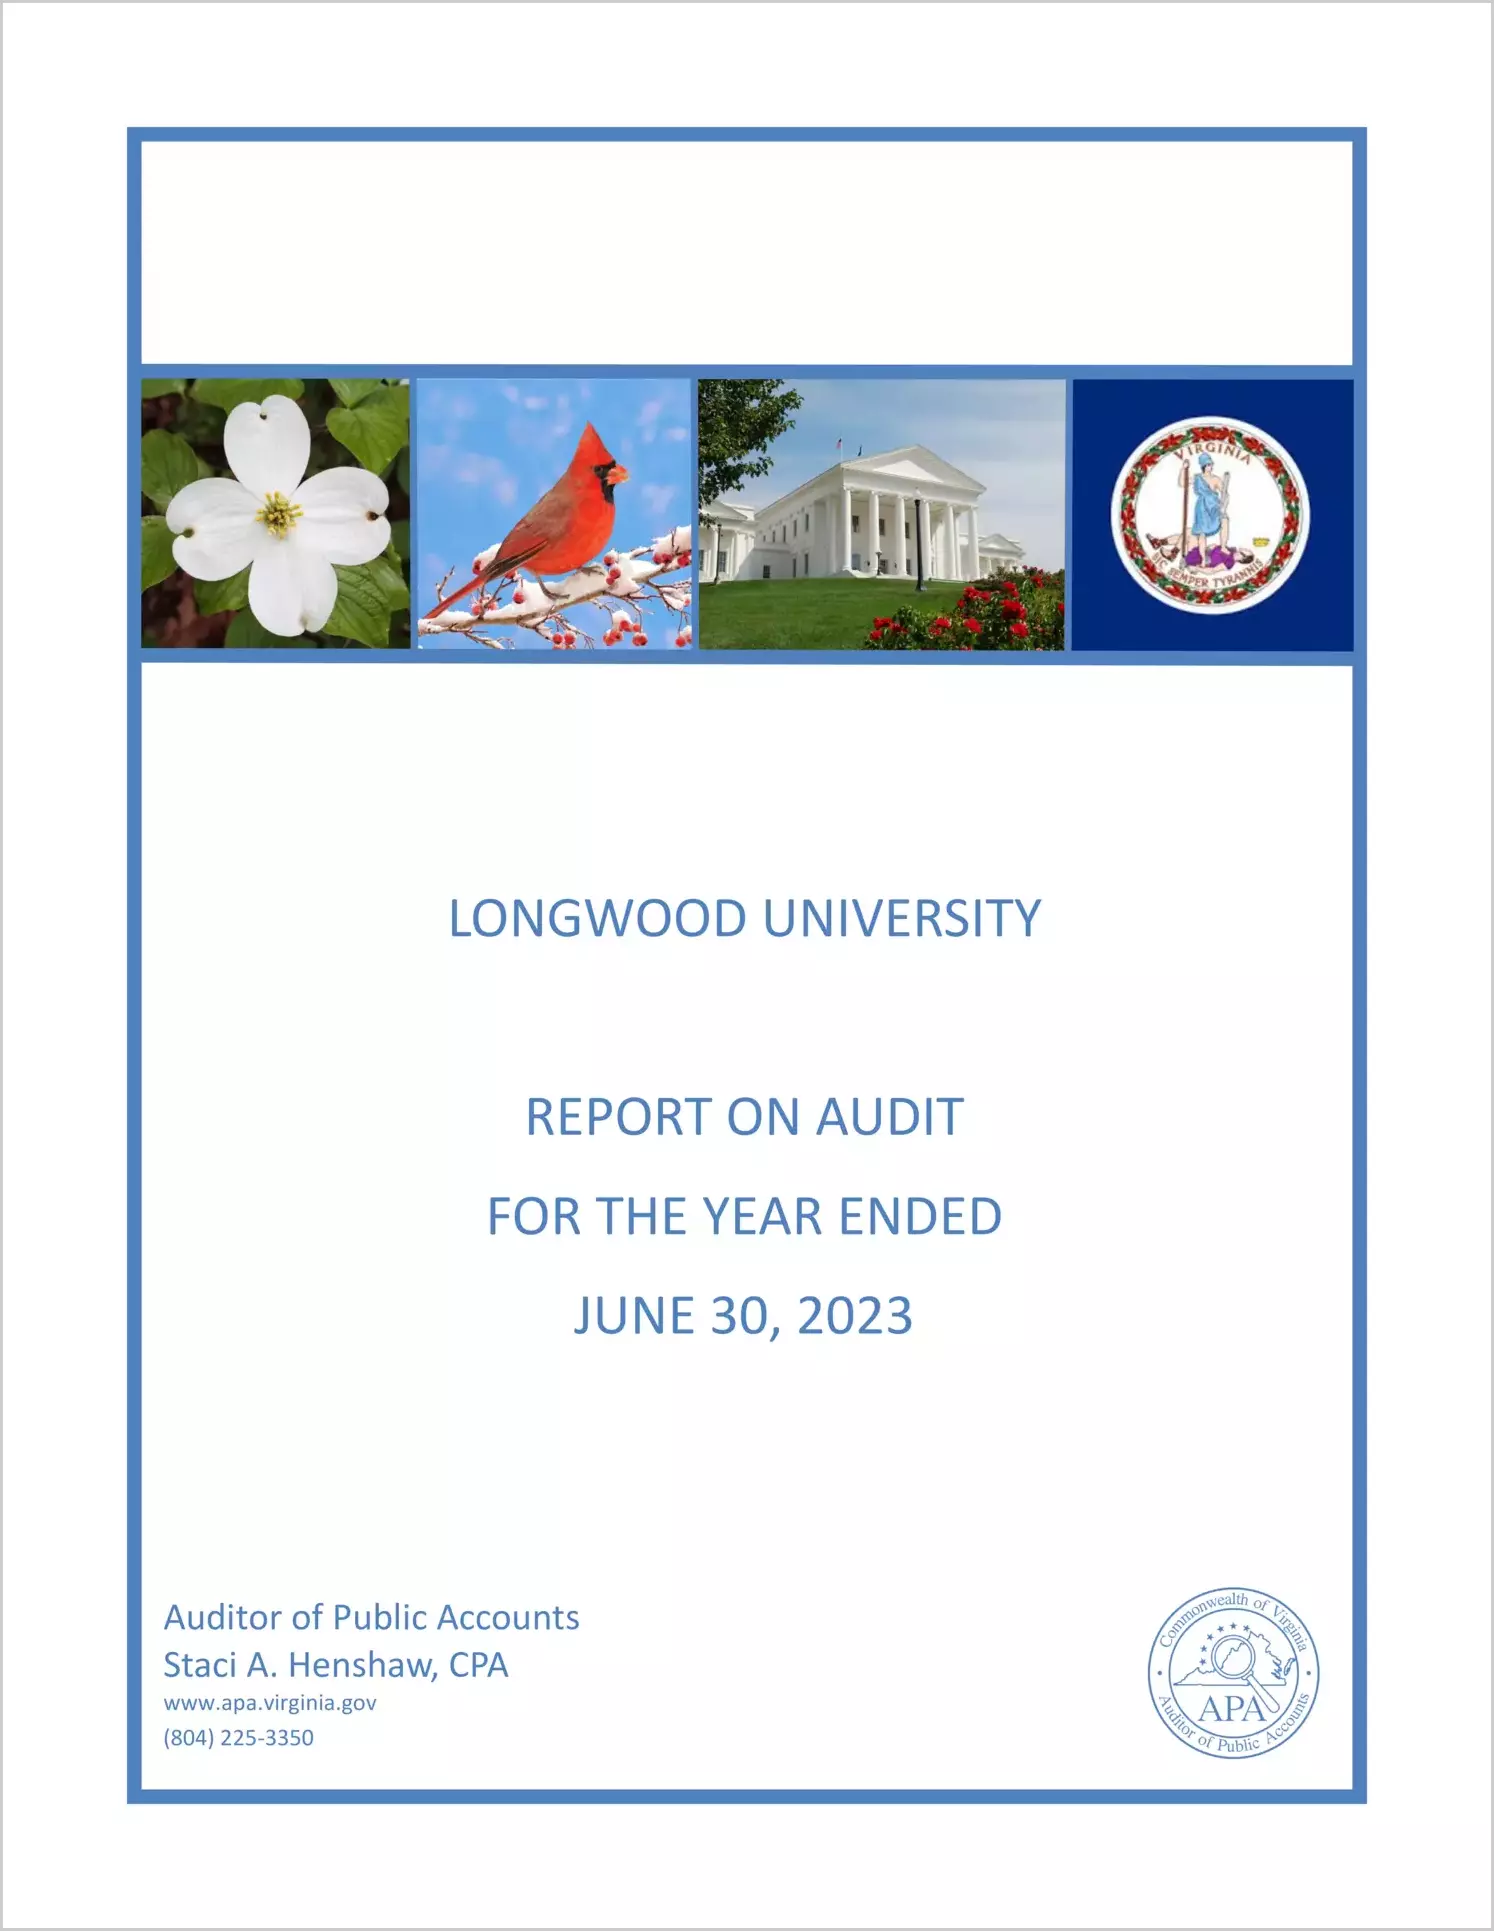 Longwood University for the year ended June 30, 2023